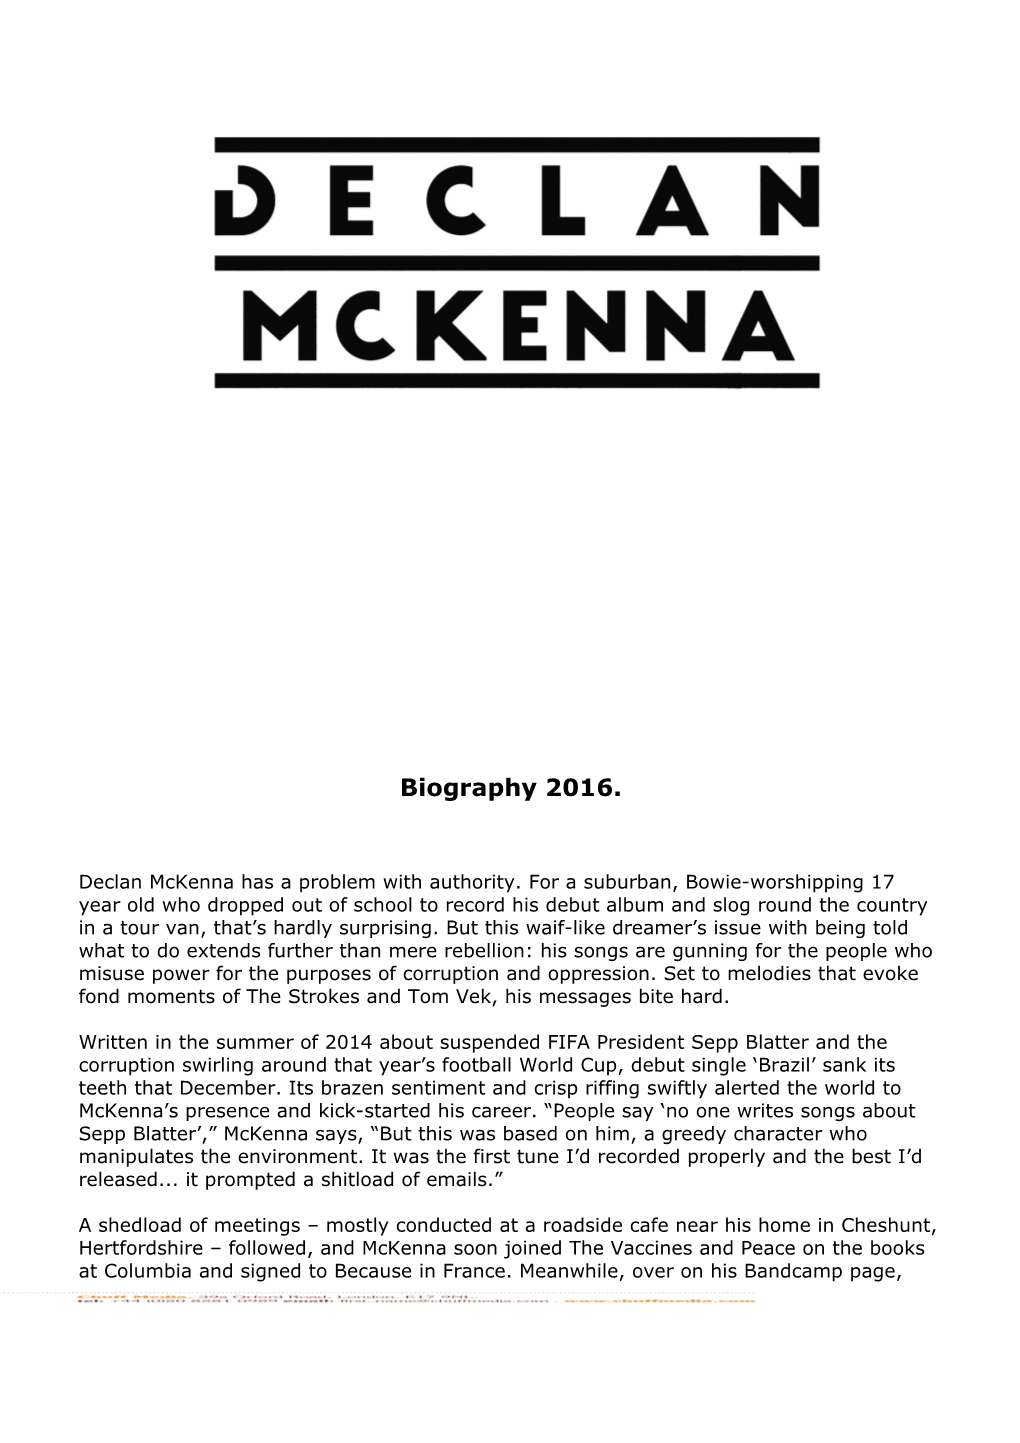 Declan Mckenna Has a Problem with Authority. for a Suburban, Bowie-Worshipping 17 Year